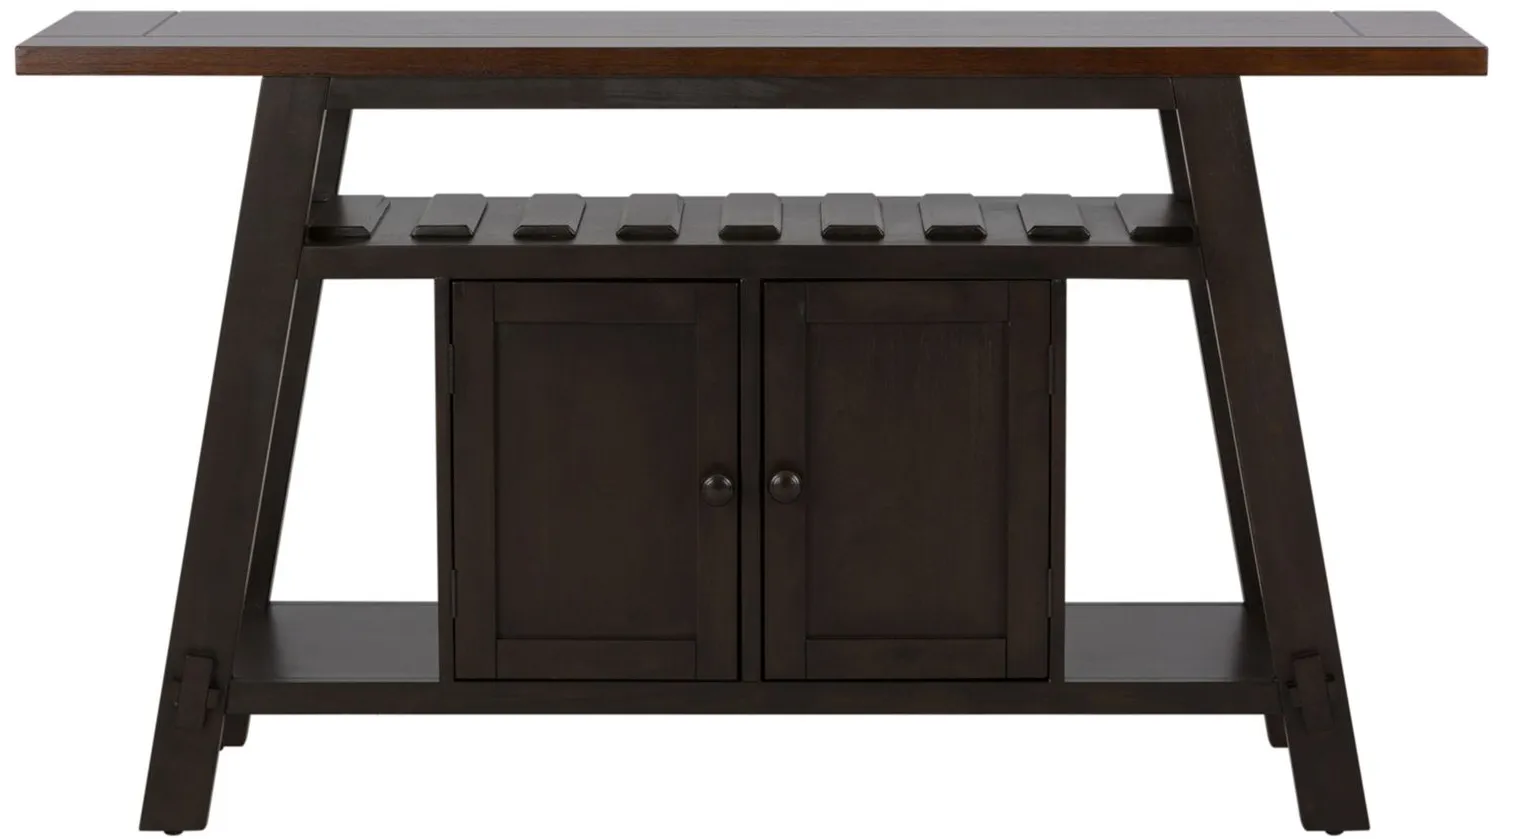 Timothy Server w/ Wine Storage in Black by Liberty Furniture